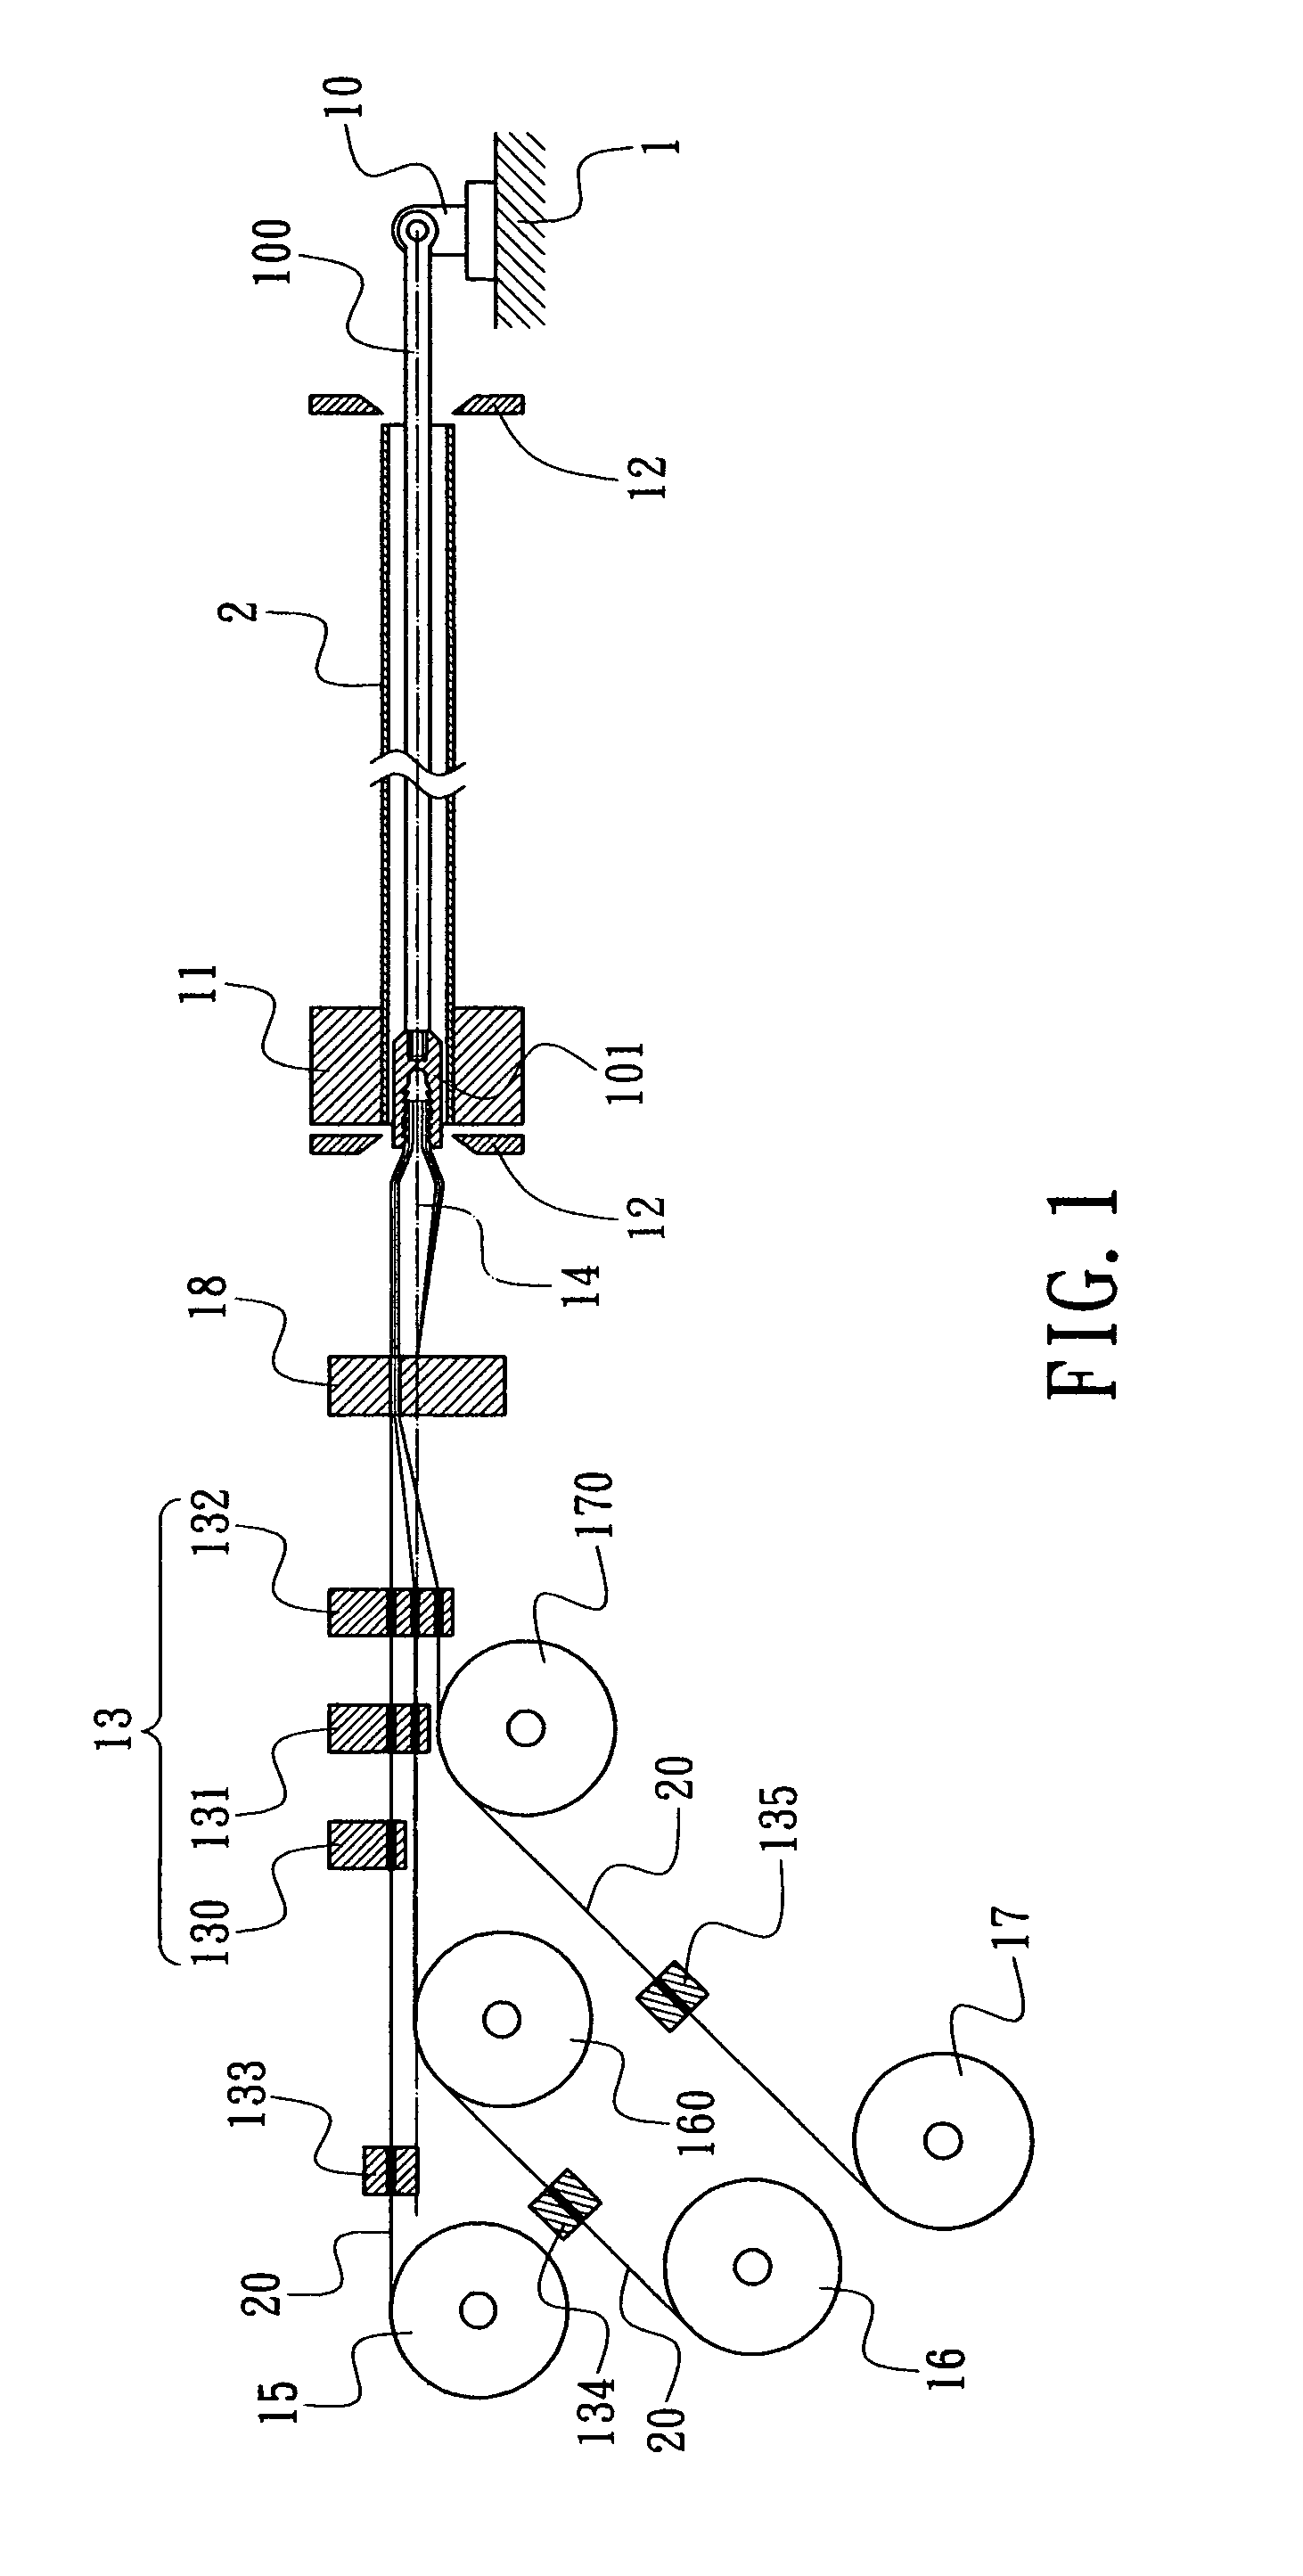 Apparatus for disposing capillary structure into heat pipe